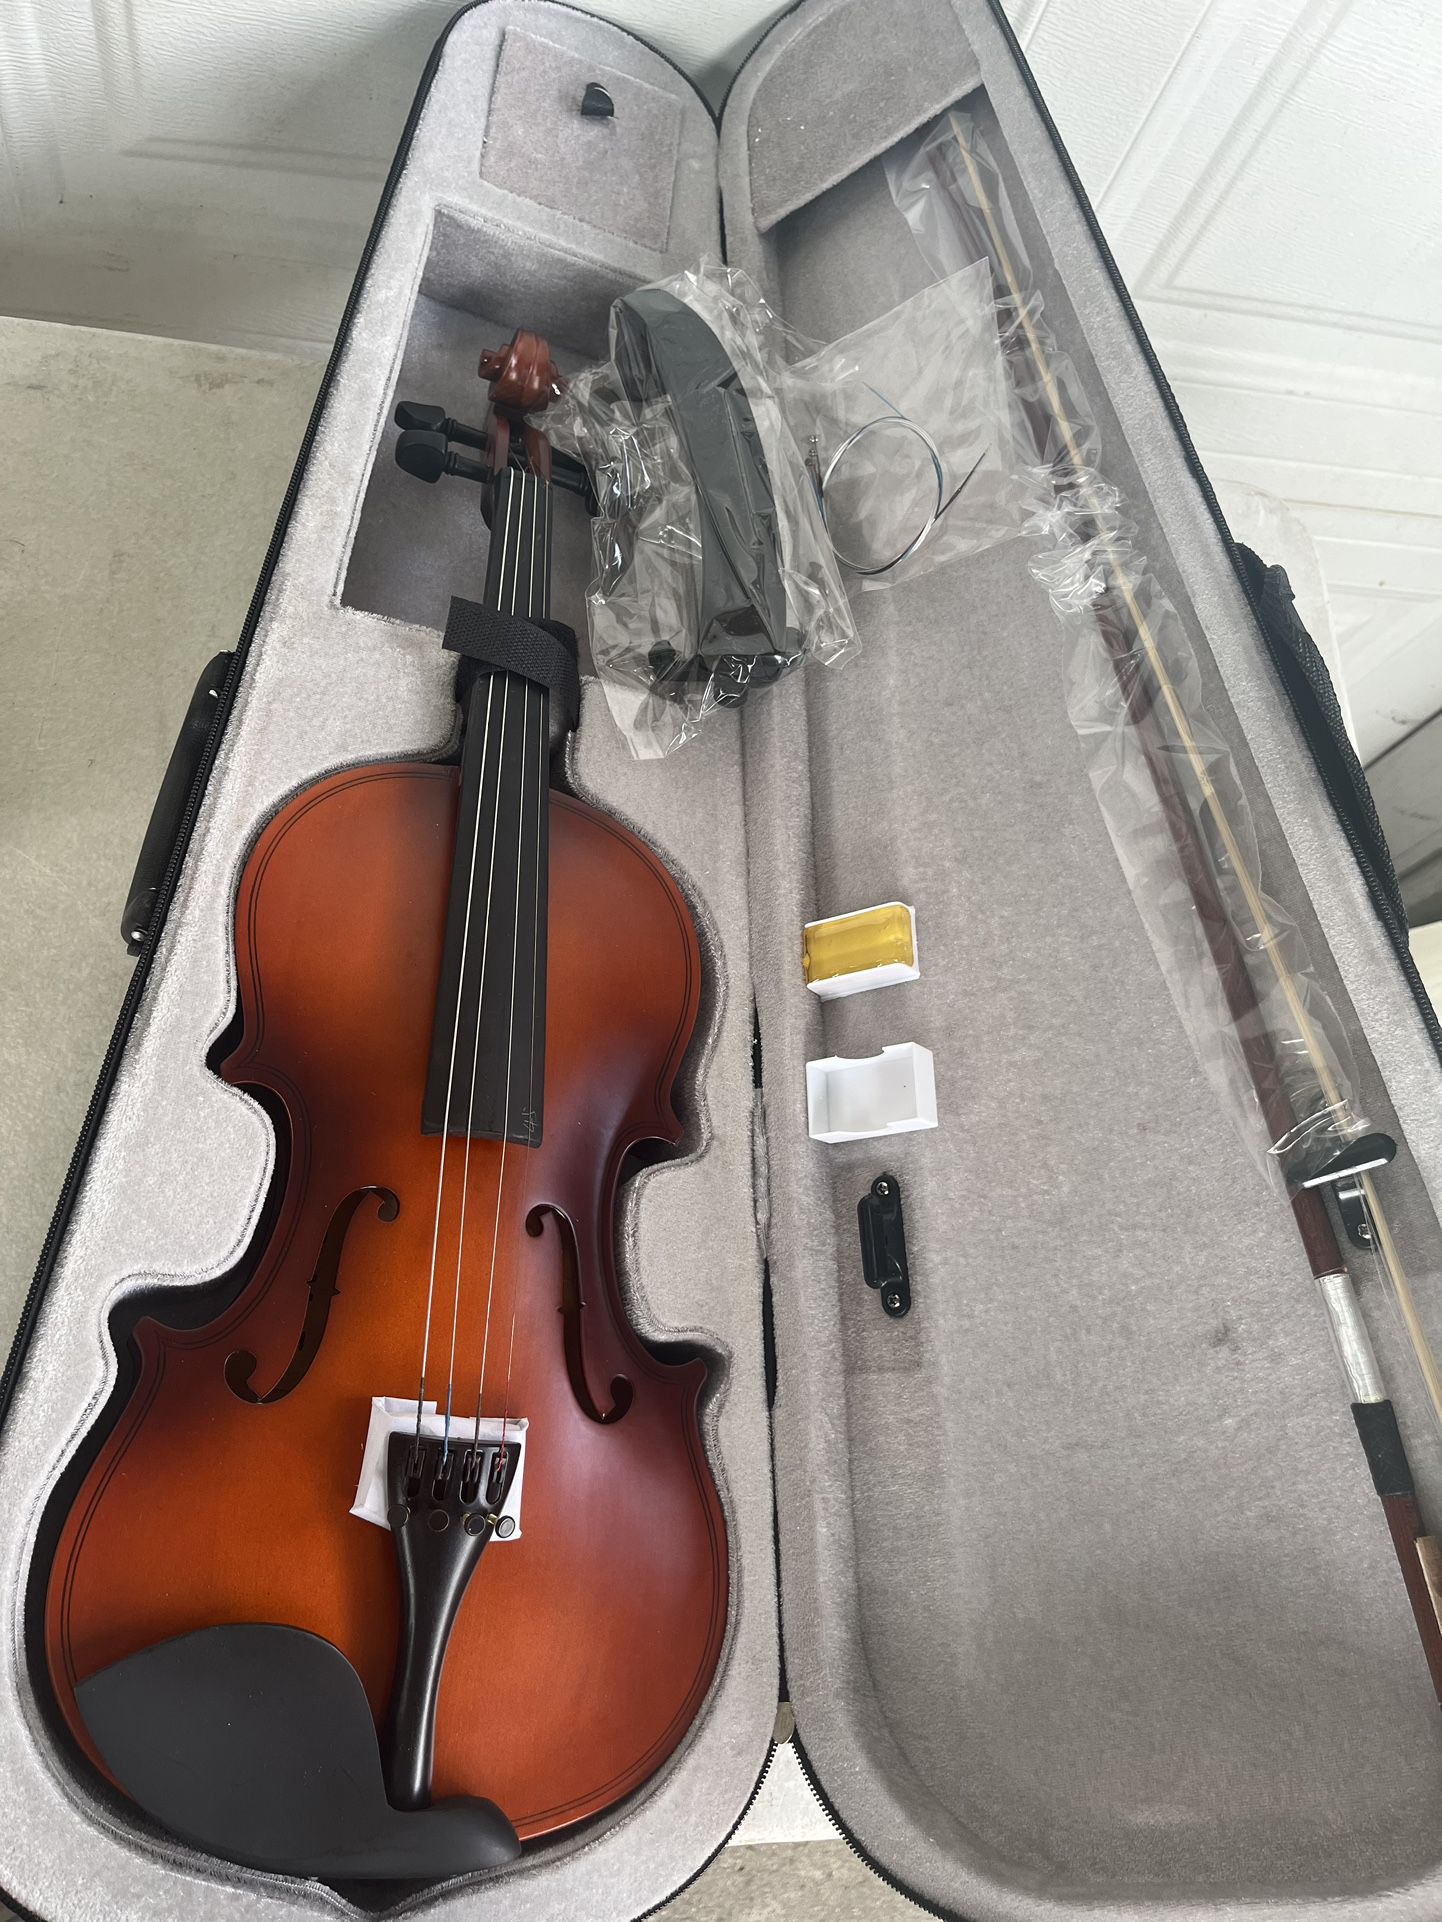 4 Full Size Violin Set 4 Solid Wood Violin for Adults Beginners Students Kids with Hard Case with Hygrometer, Violin Bow, Shoulder Rest, Strings 🔥🔥